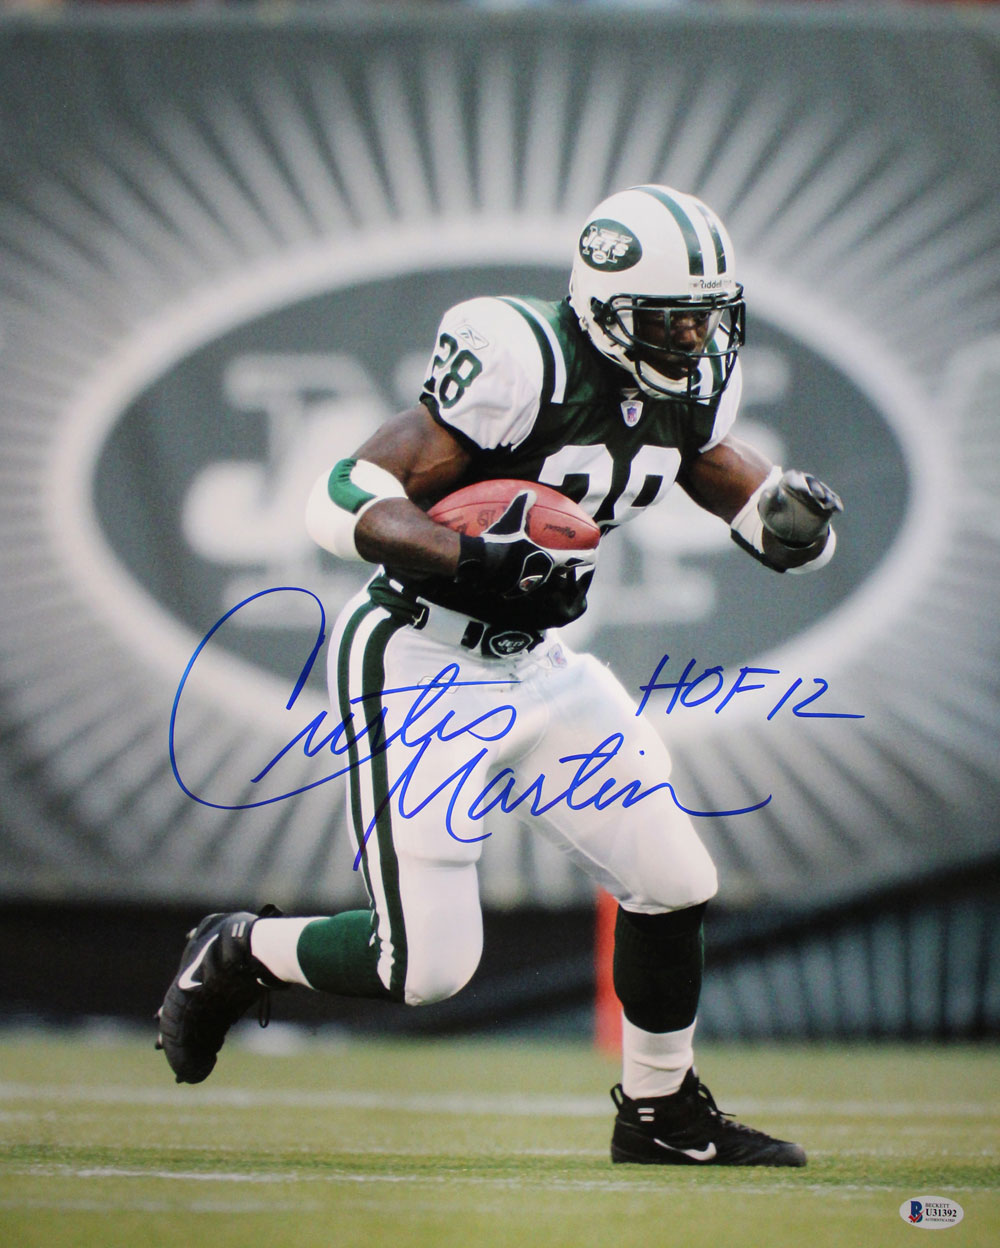 Curtis Martin Autographed/Signed New York Jets 16x20 Photo HOF BAS 29166